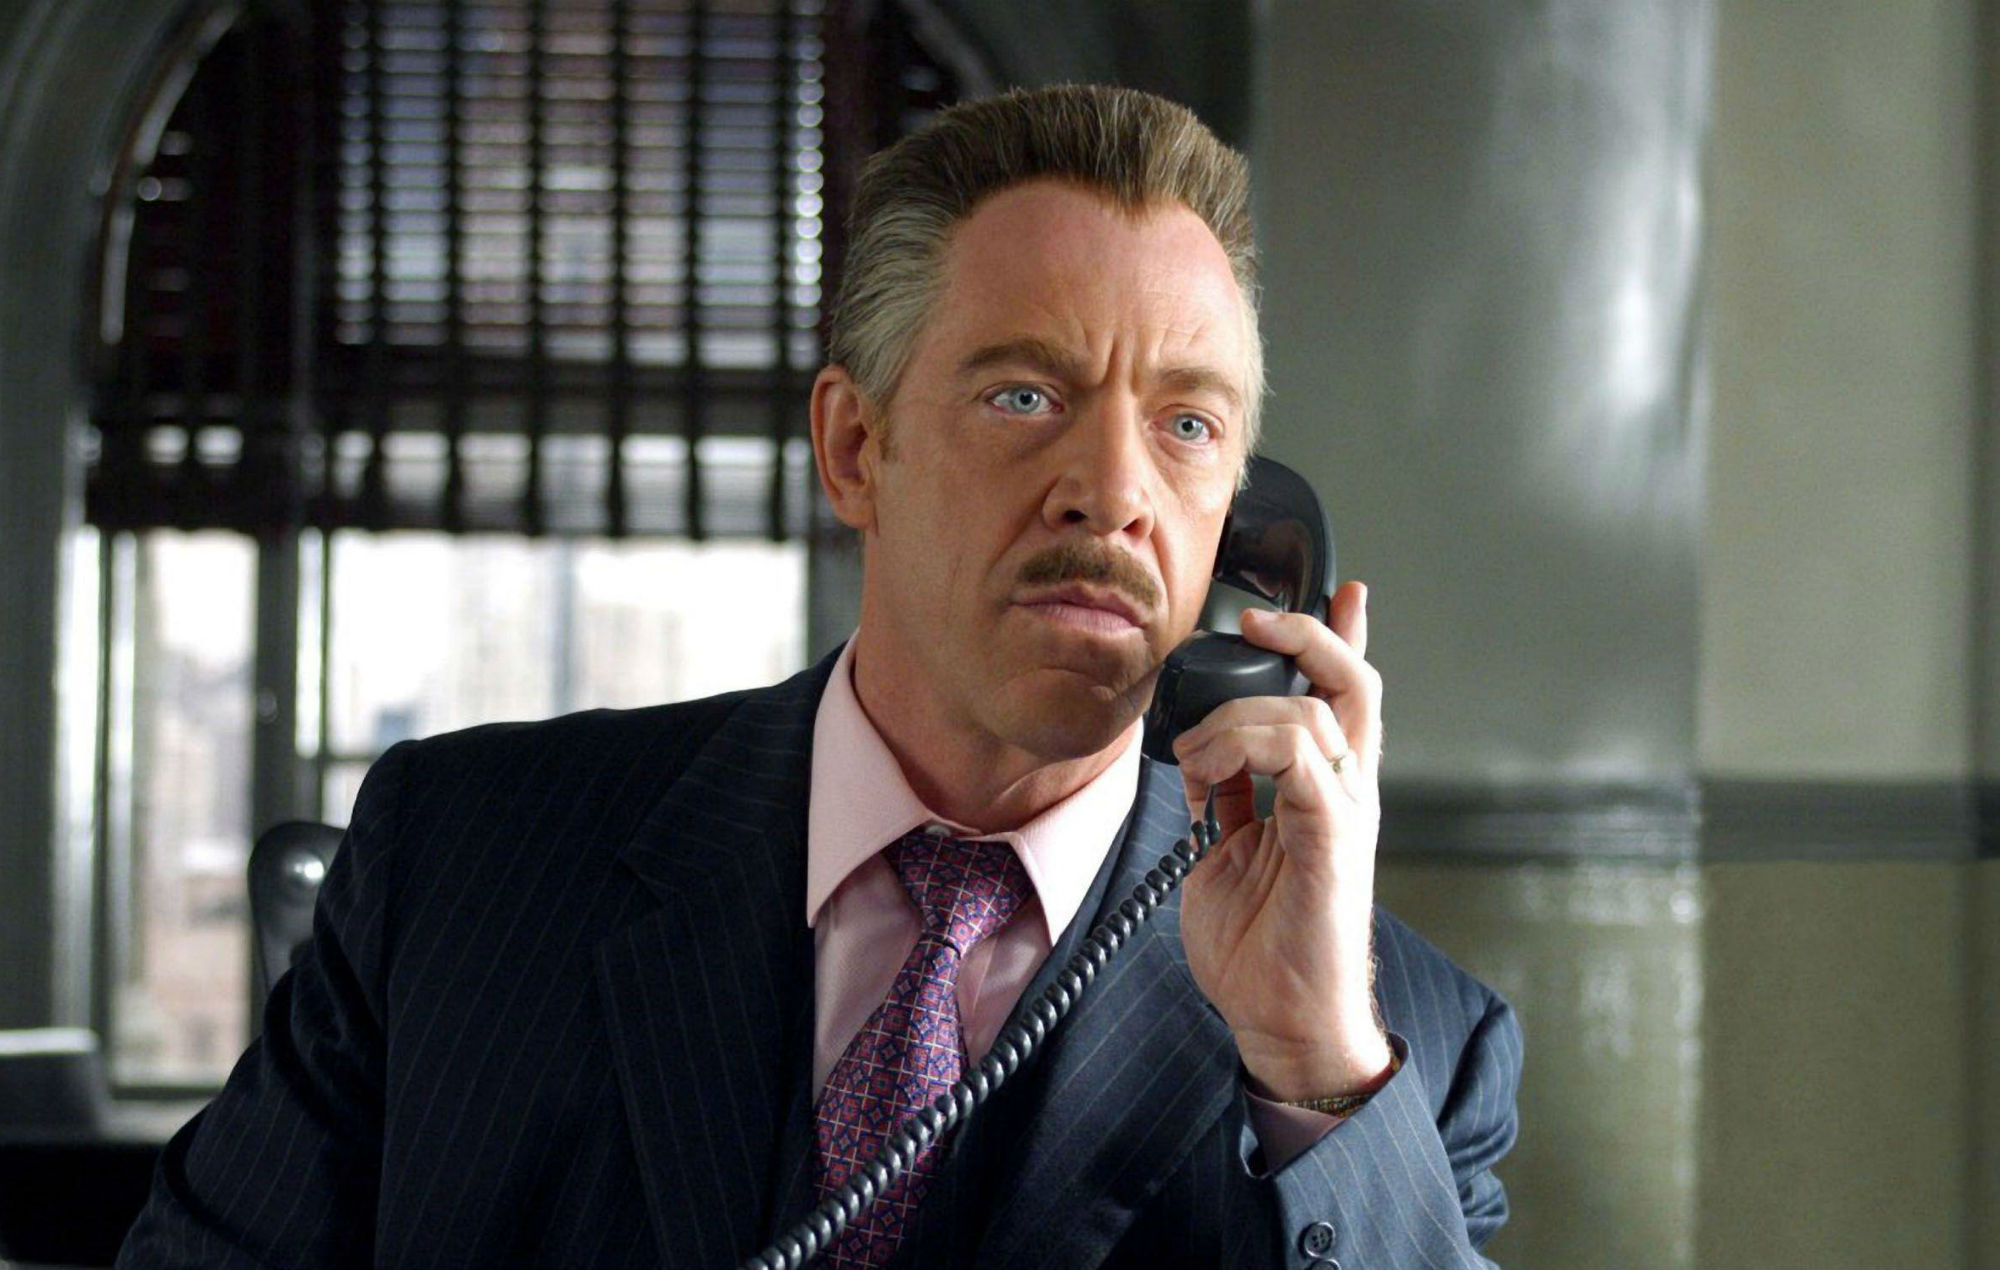 J.K. Simmons as Terence Fletcher in Spider-Man